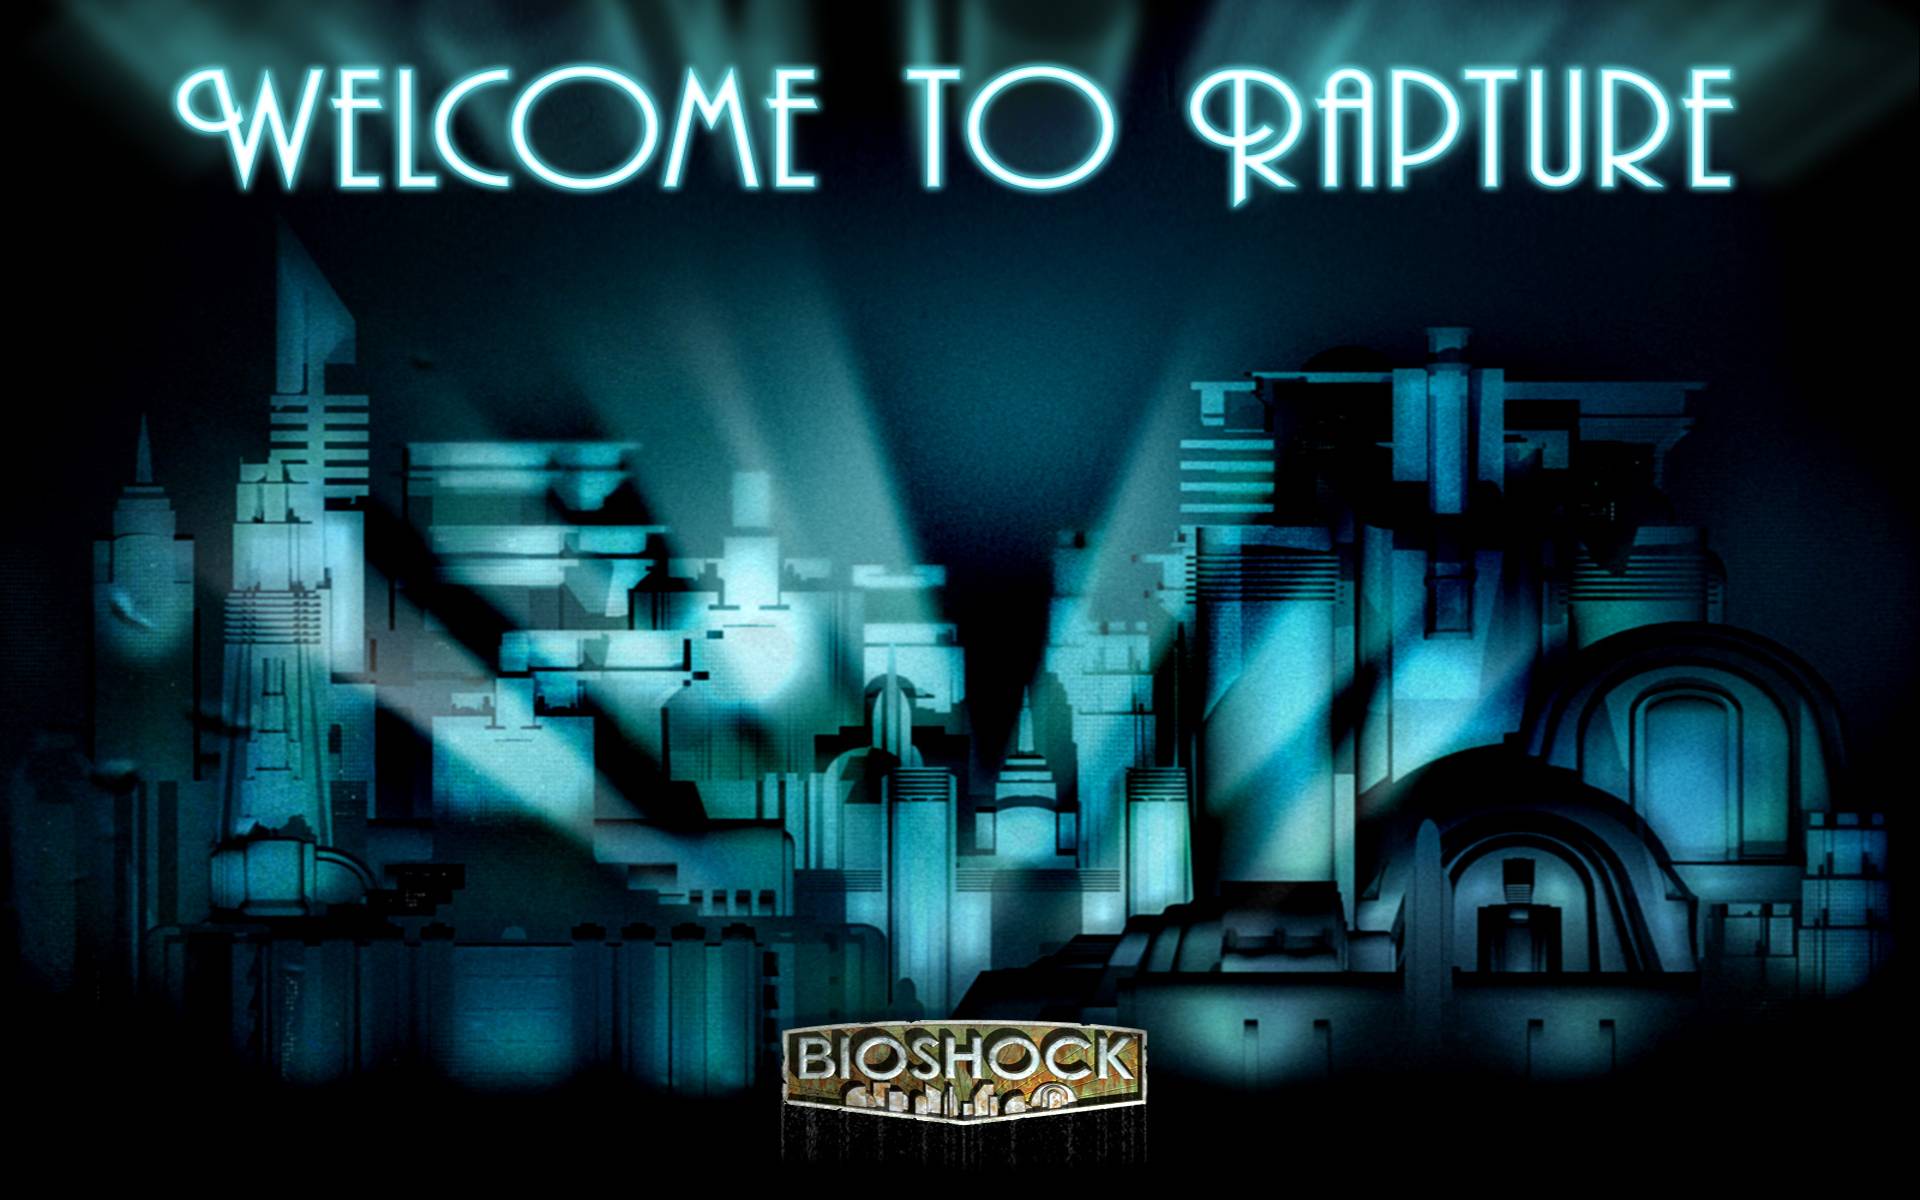 download the rapture game for free